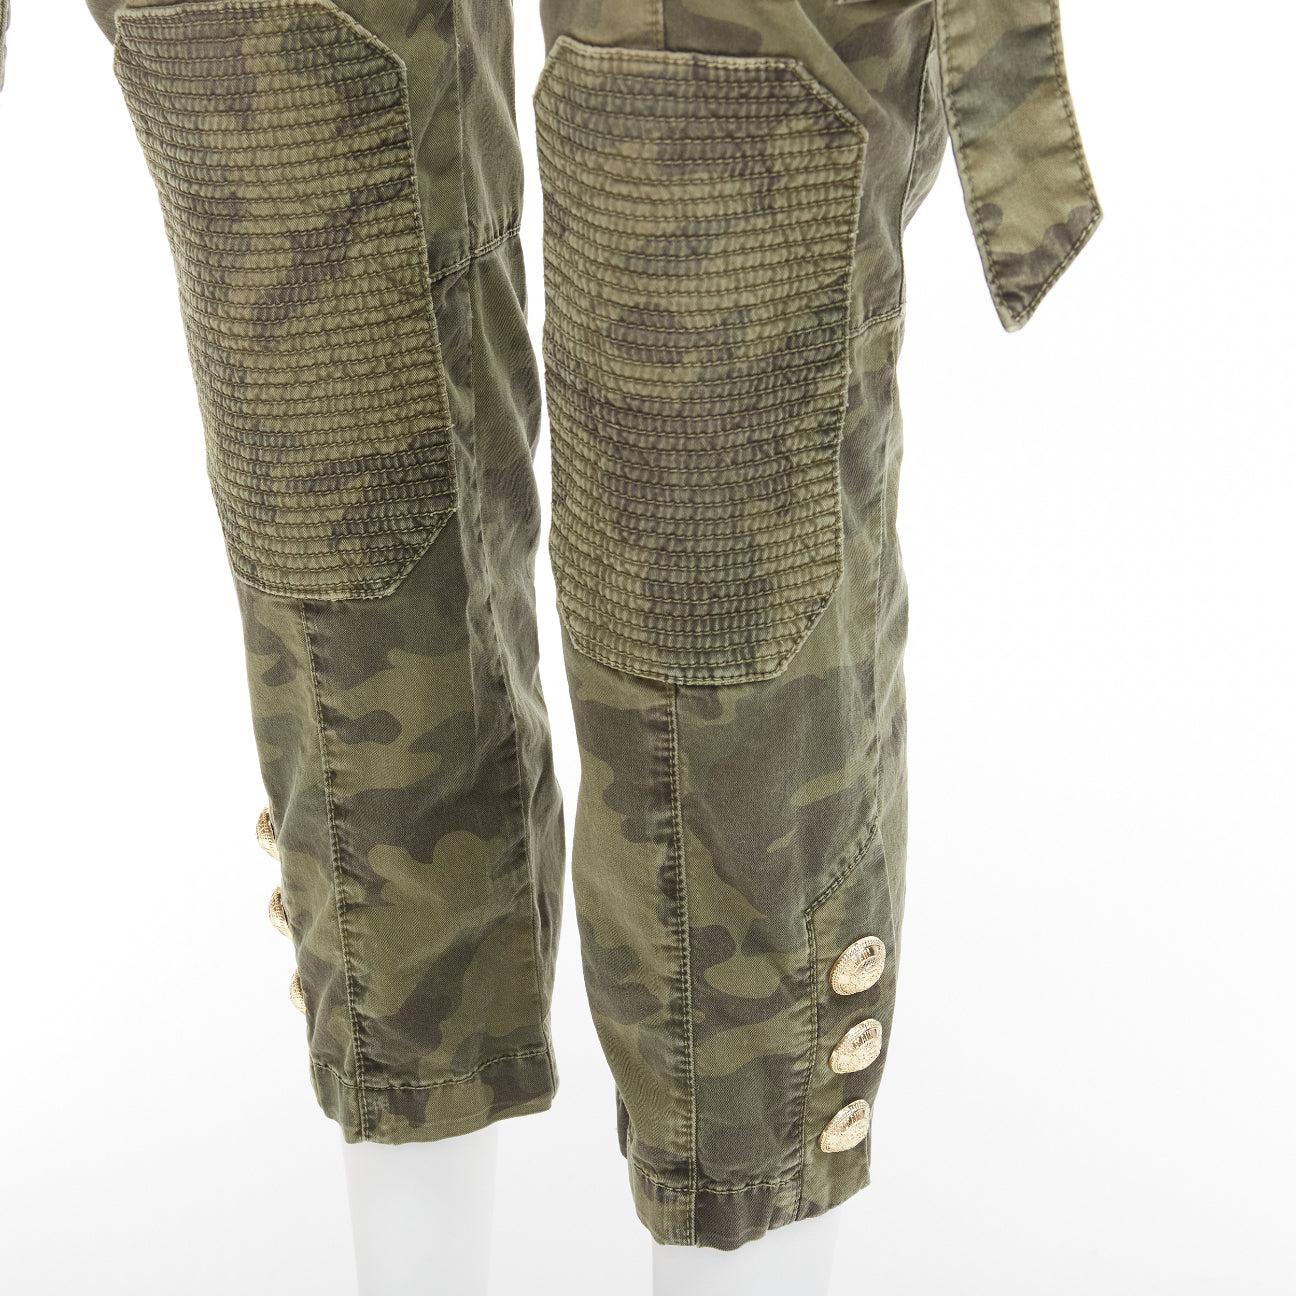 BALMAIN green camo cotton gold hardware mid waist cargo biker pants FR34 XS
Reference: AAWC/A00890
Brand: Balmain
Designer: Olivier Rousteing
Material: Cotton, Blend
Color: Green, Gold
Pattern: Camouflage
Closure: Zip Fly
Extra Details: Bring a